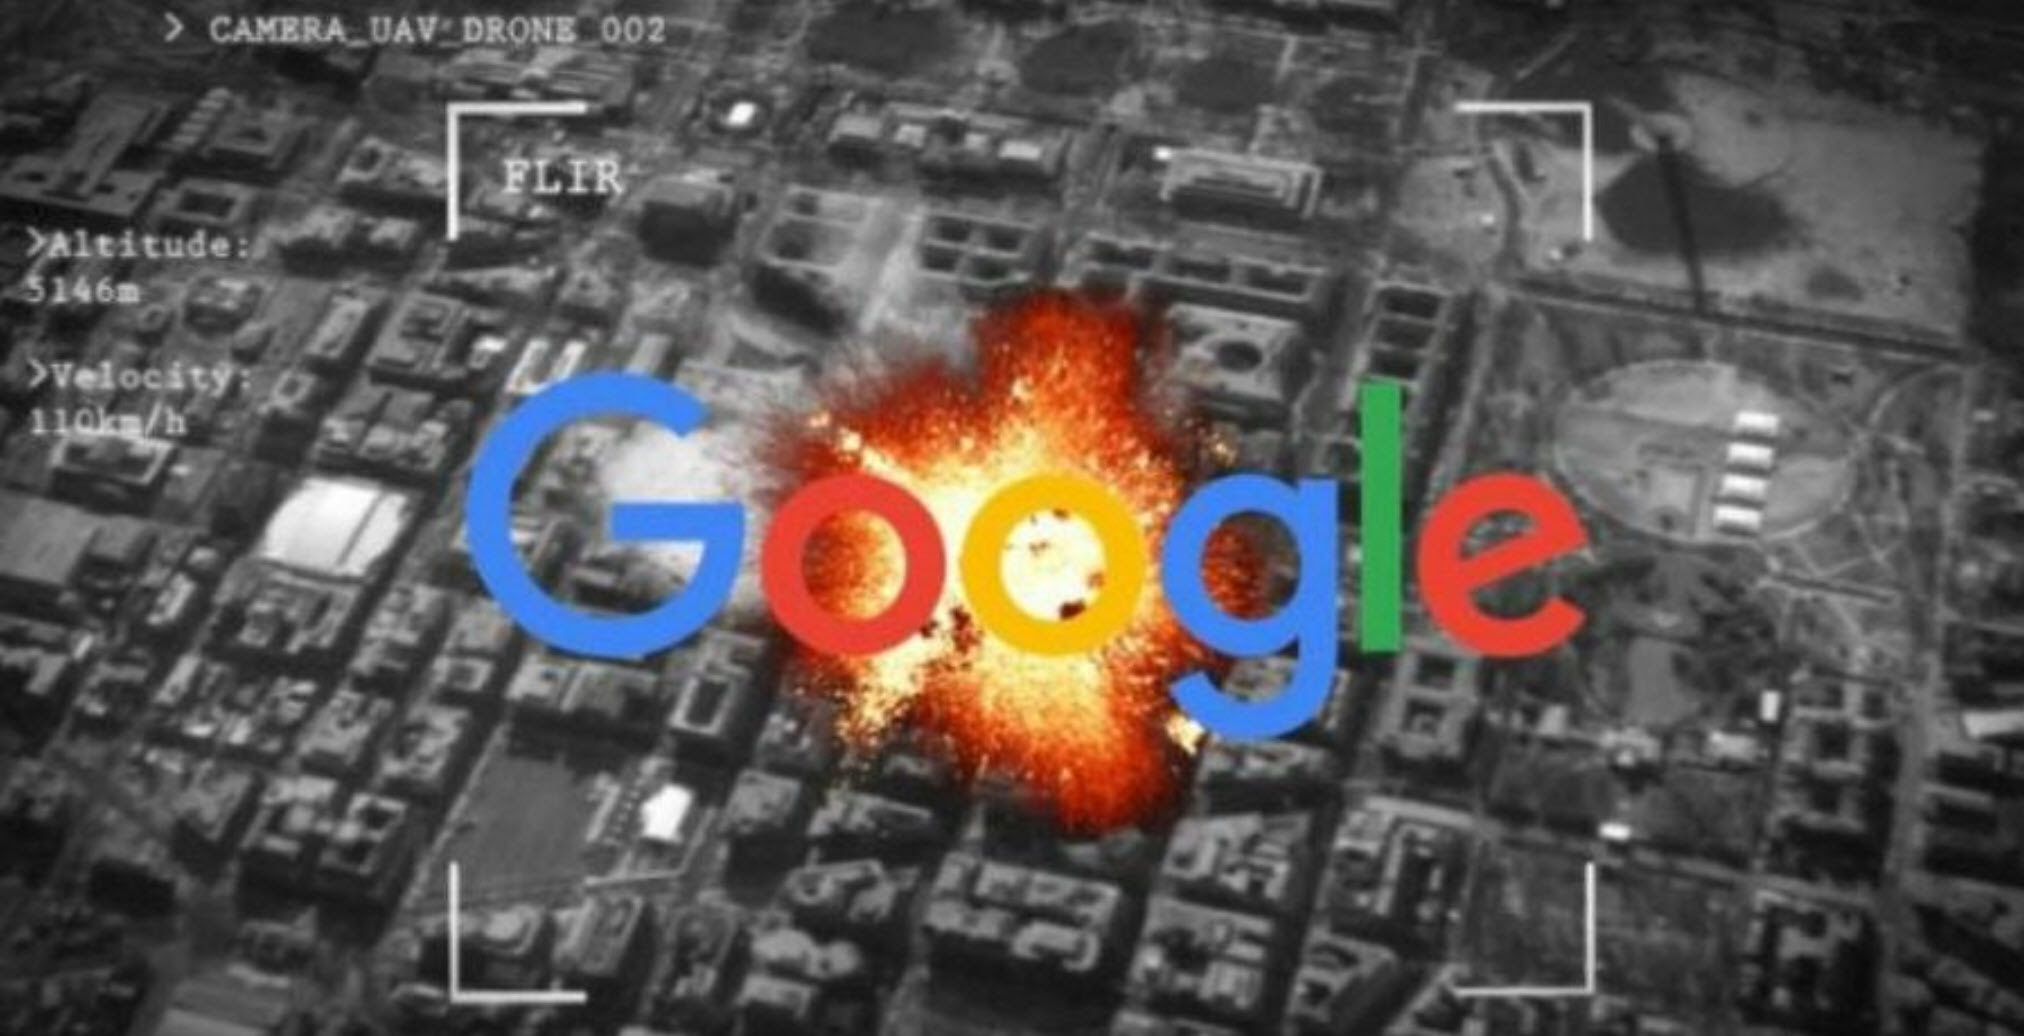 Pentagon Holds Clandestine Meeting With Google, Then BOOM! Their Employee’s Revolt…